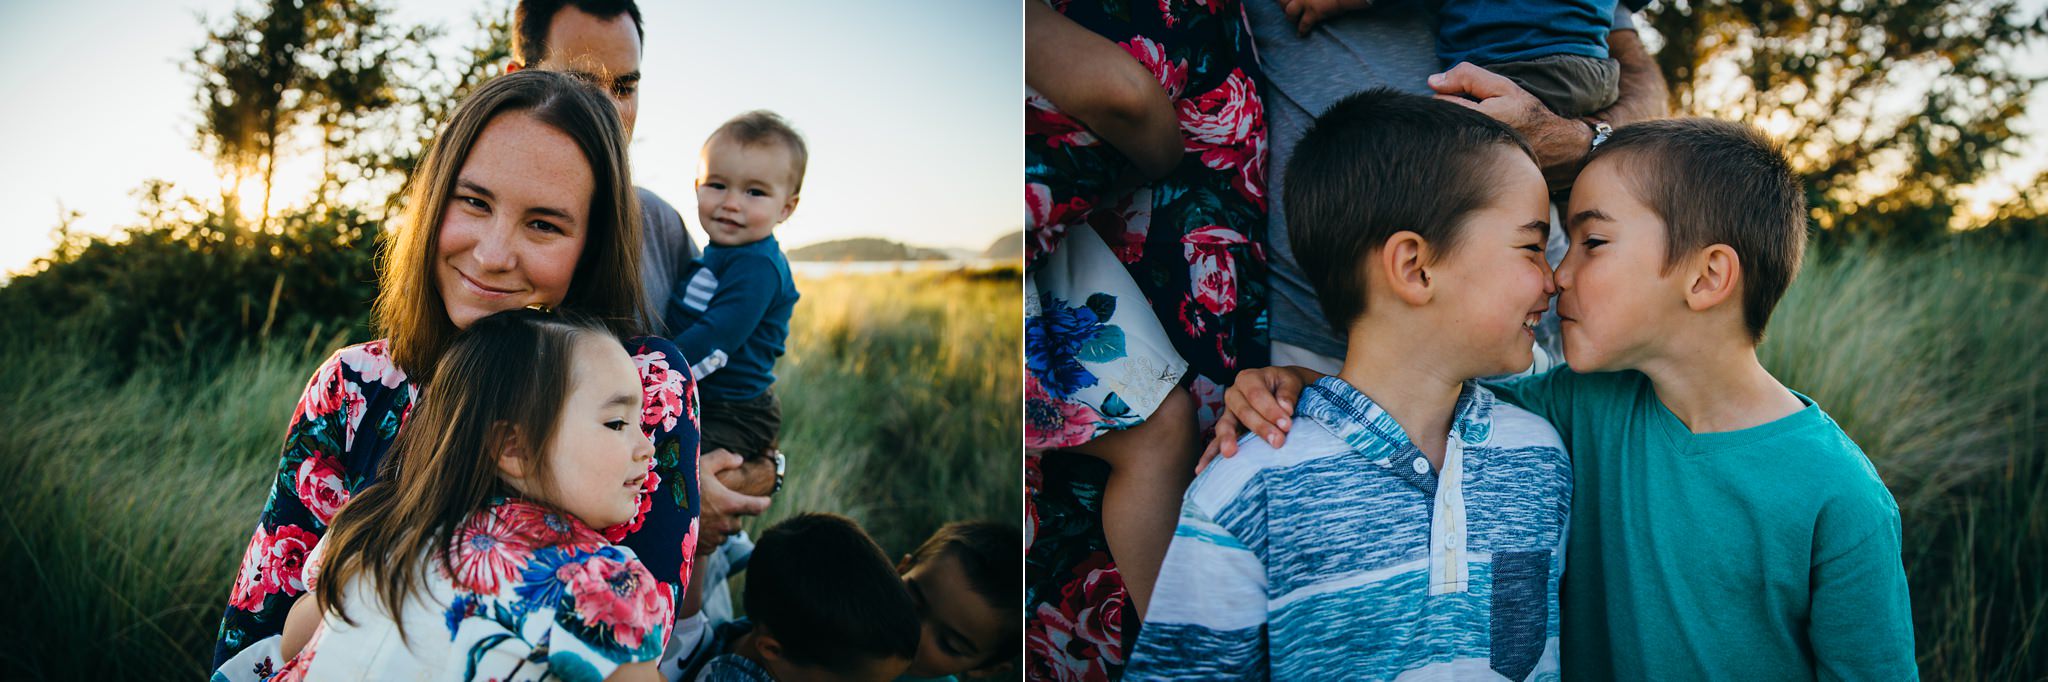 Family Pictures at Deception Pass | Whidbey Island Photographer